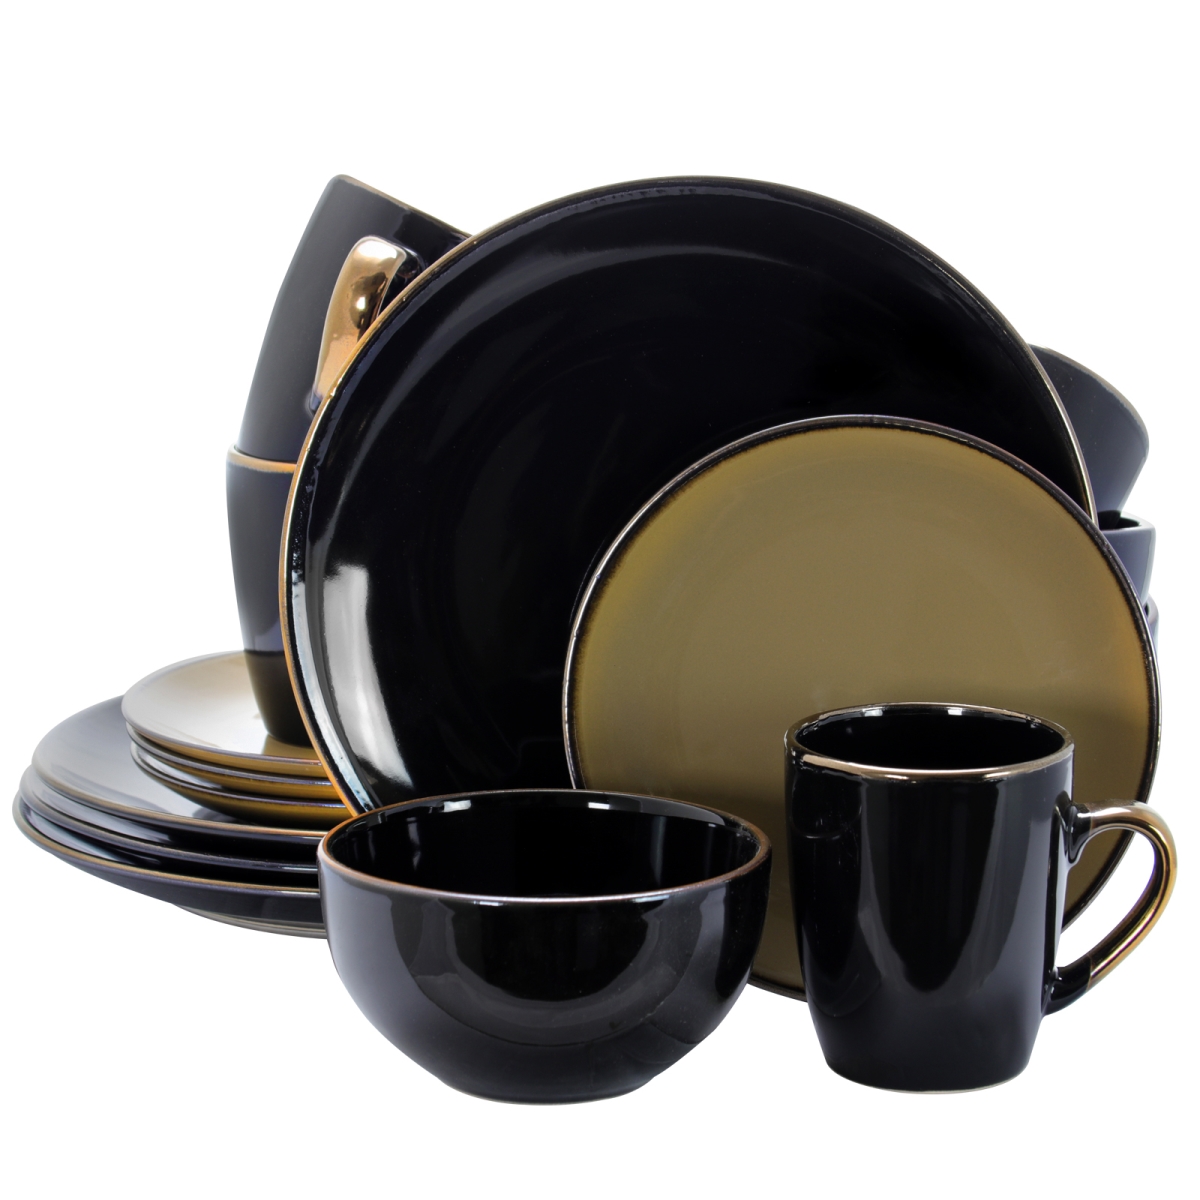 El-cambridgegrand 16 Piece Cambridge Grand Dinnerware Set With Complete Setting For 4 - Luxurious Black & Warm Taupe